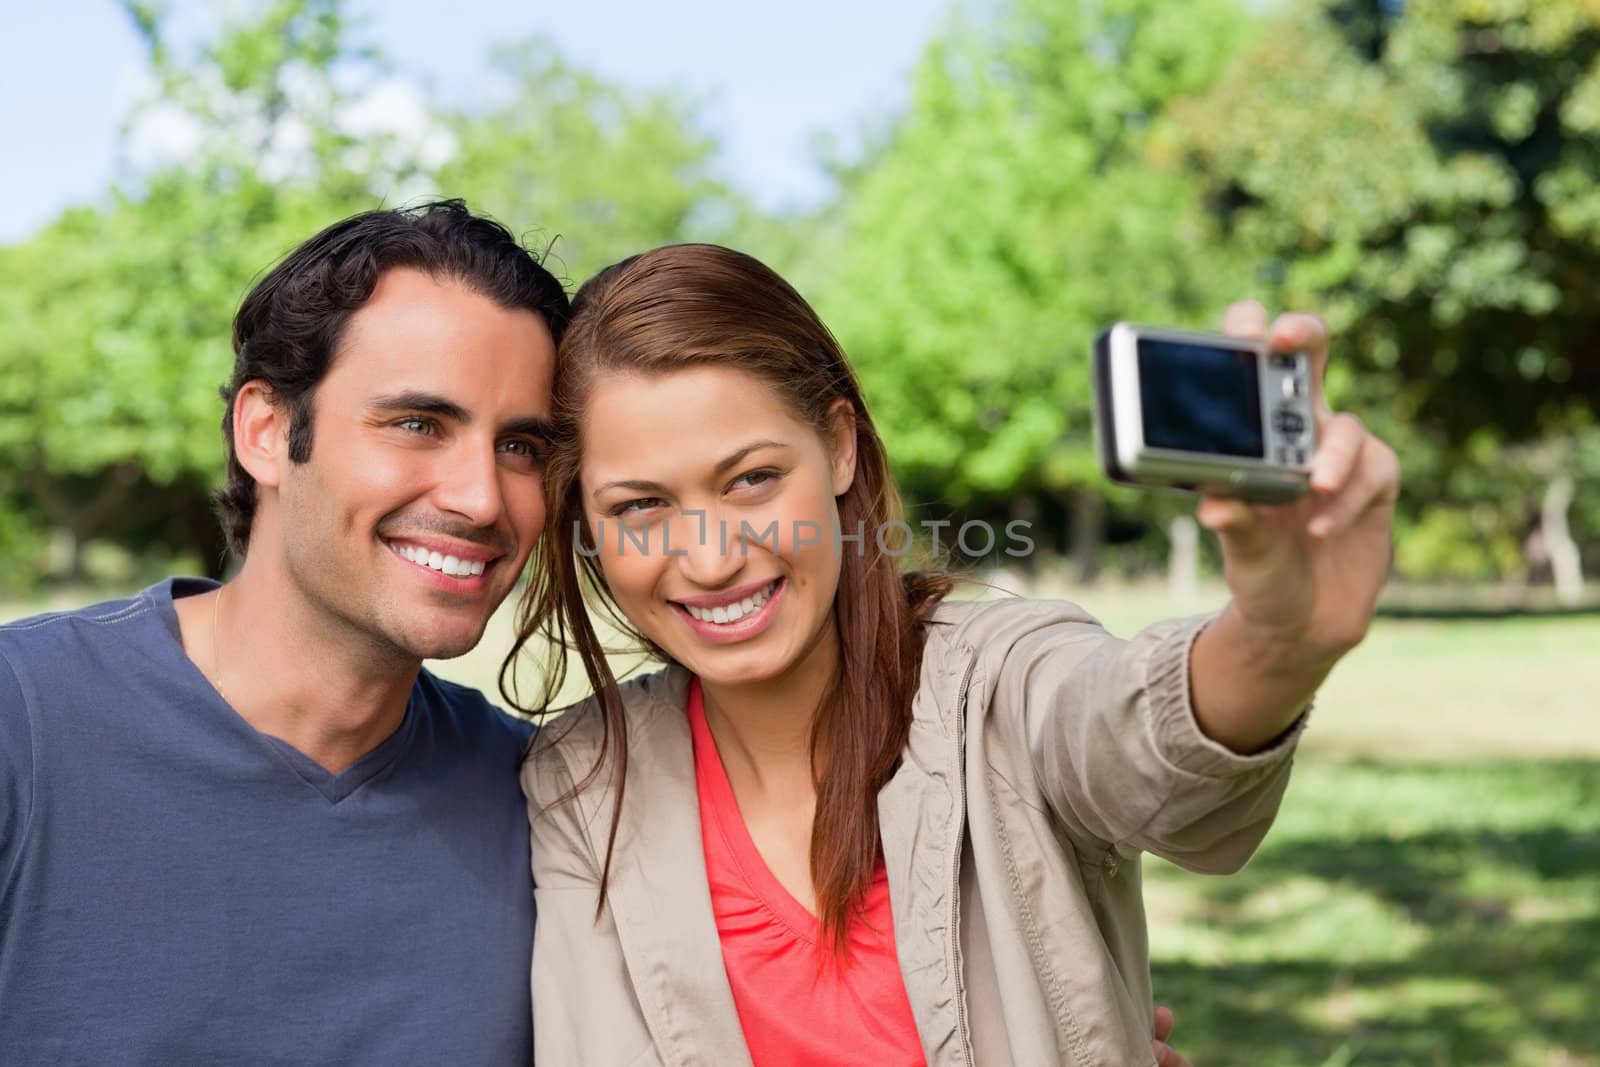 Woman holds a camera at arms reach to take a picture of her friend and herself in an open grassland environment